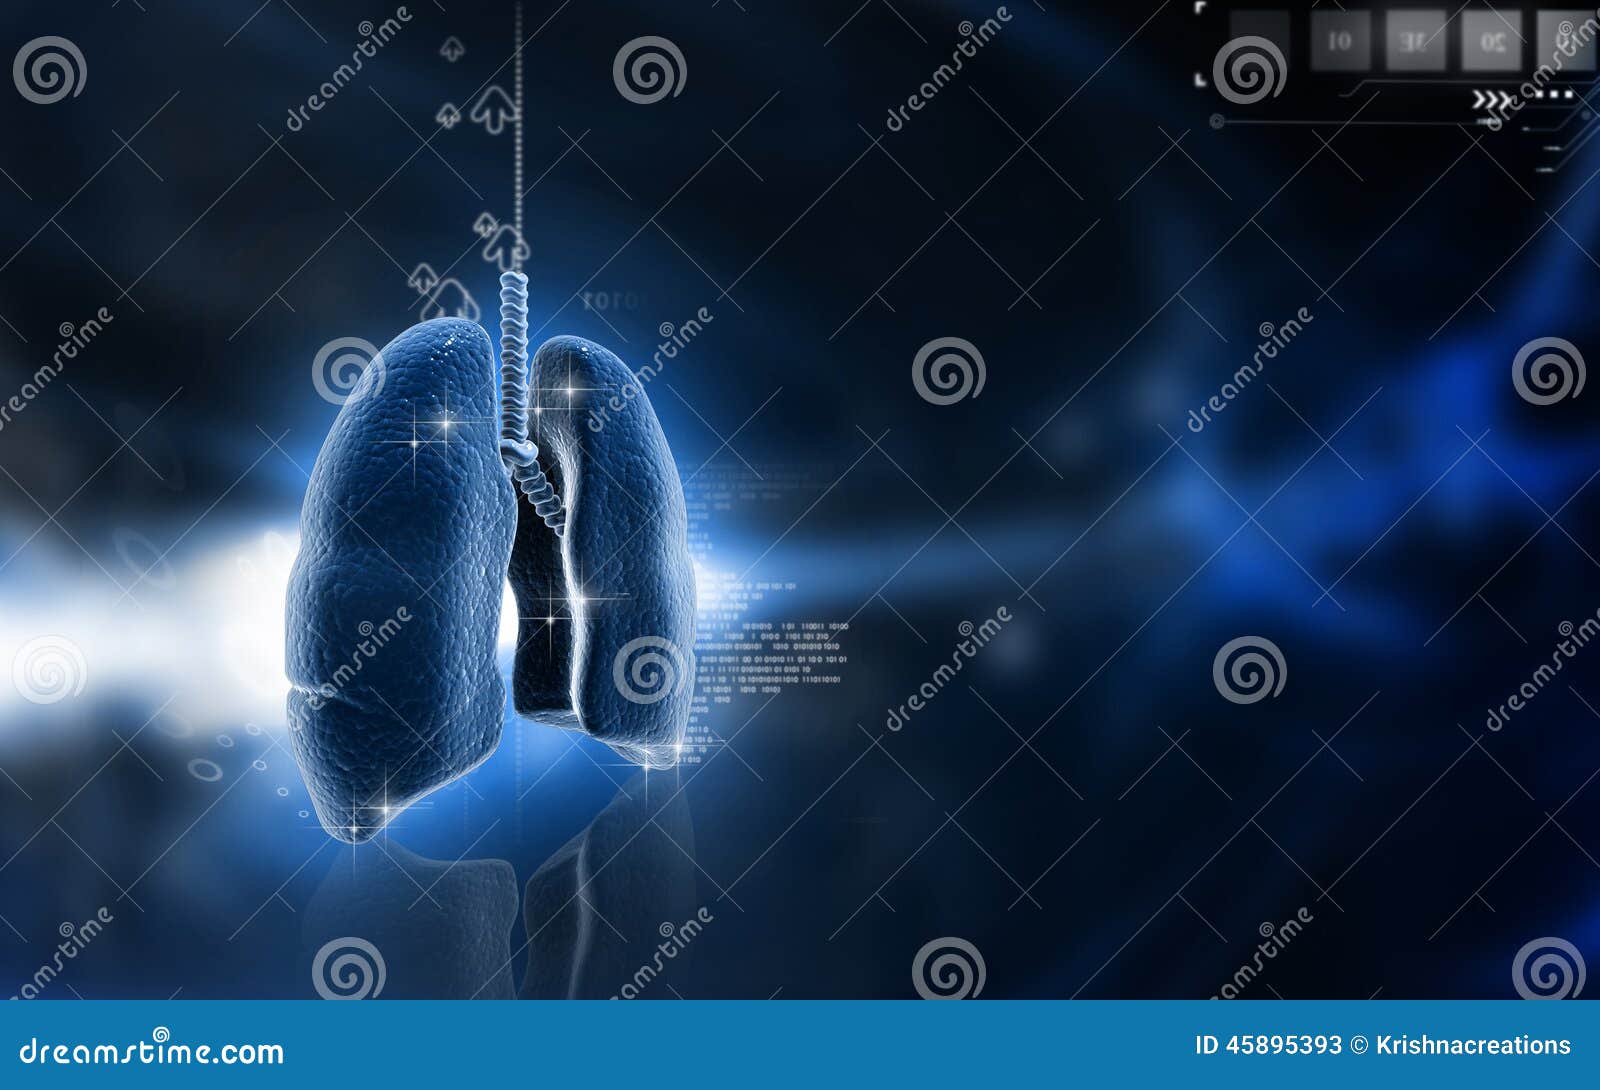 human lungs